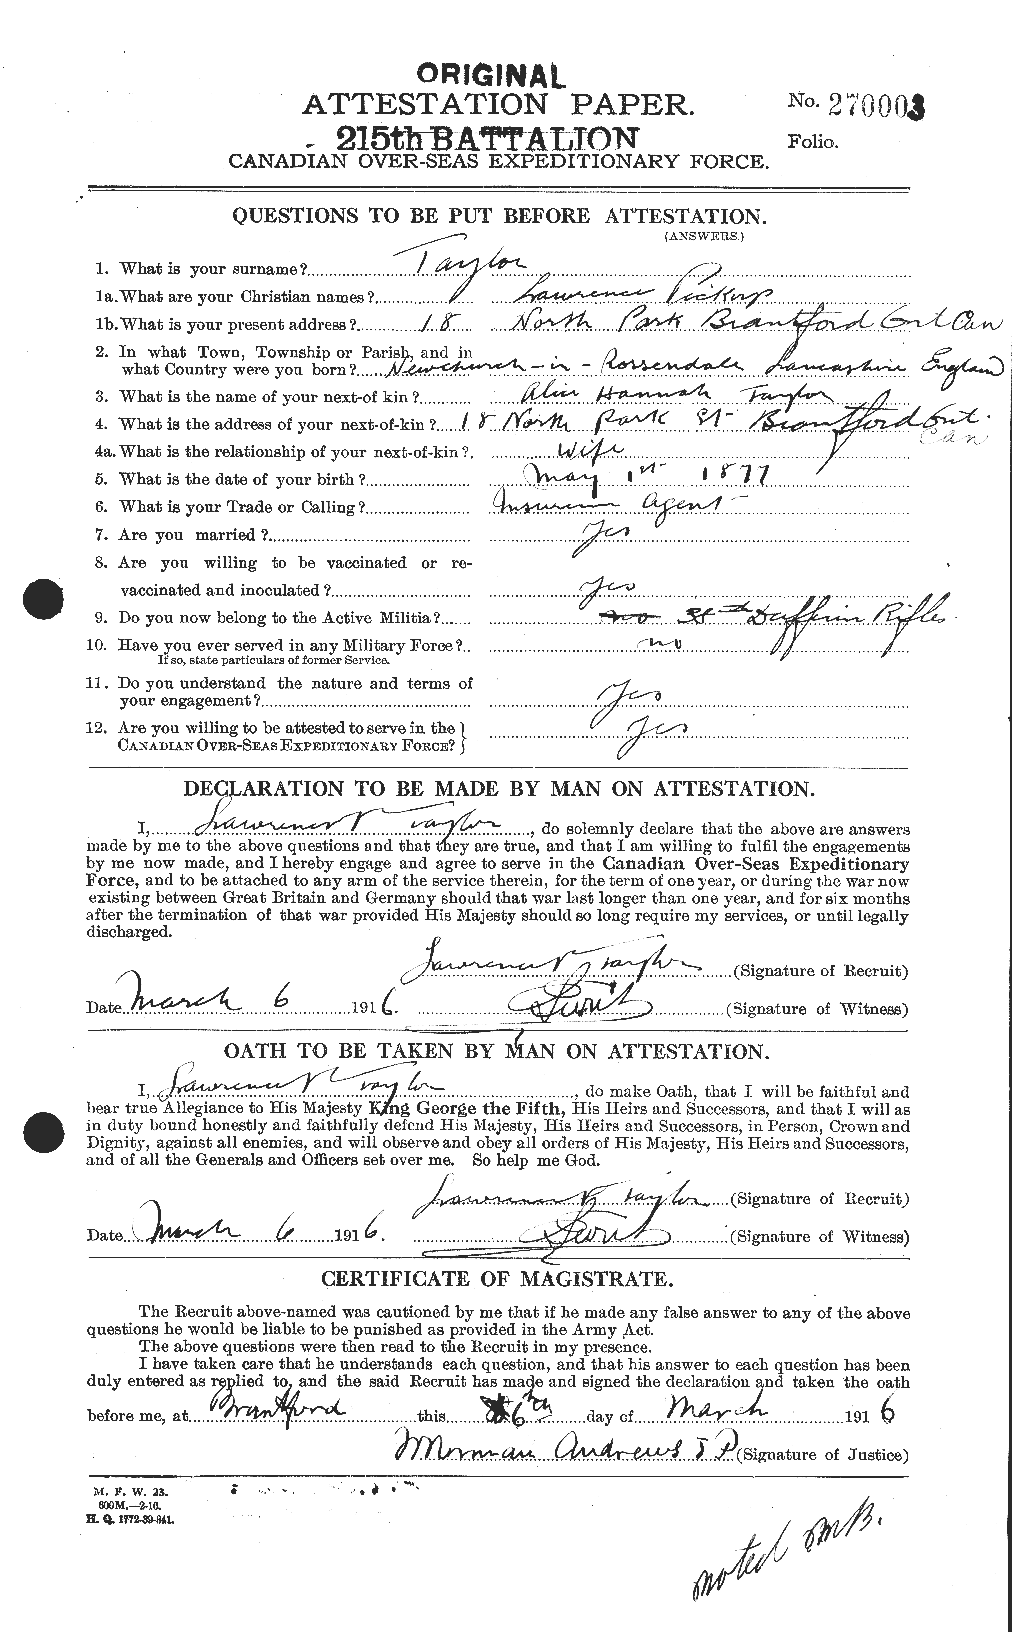 Personnel Records of the First World War - CEF 627613a